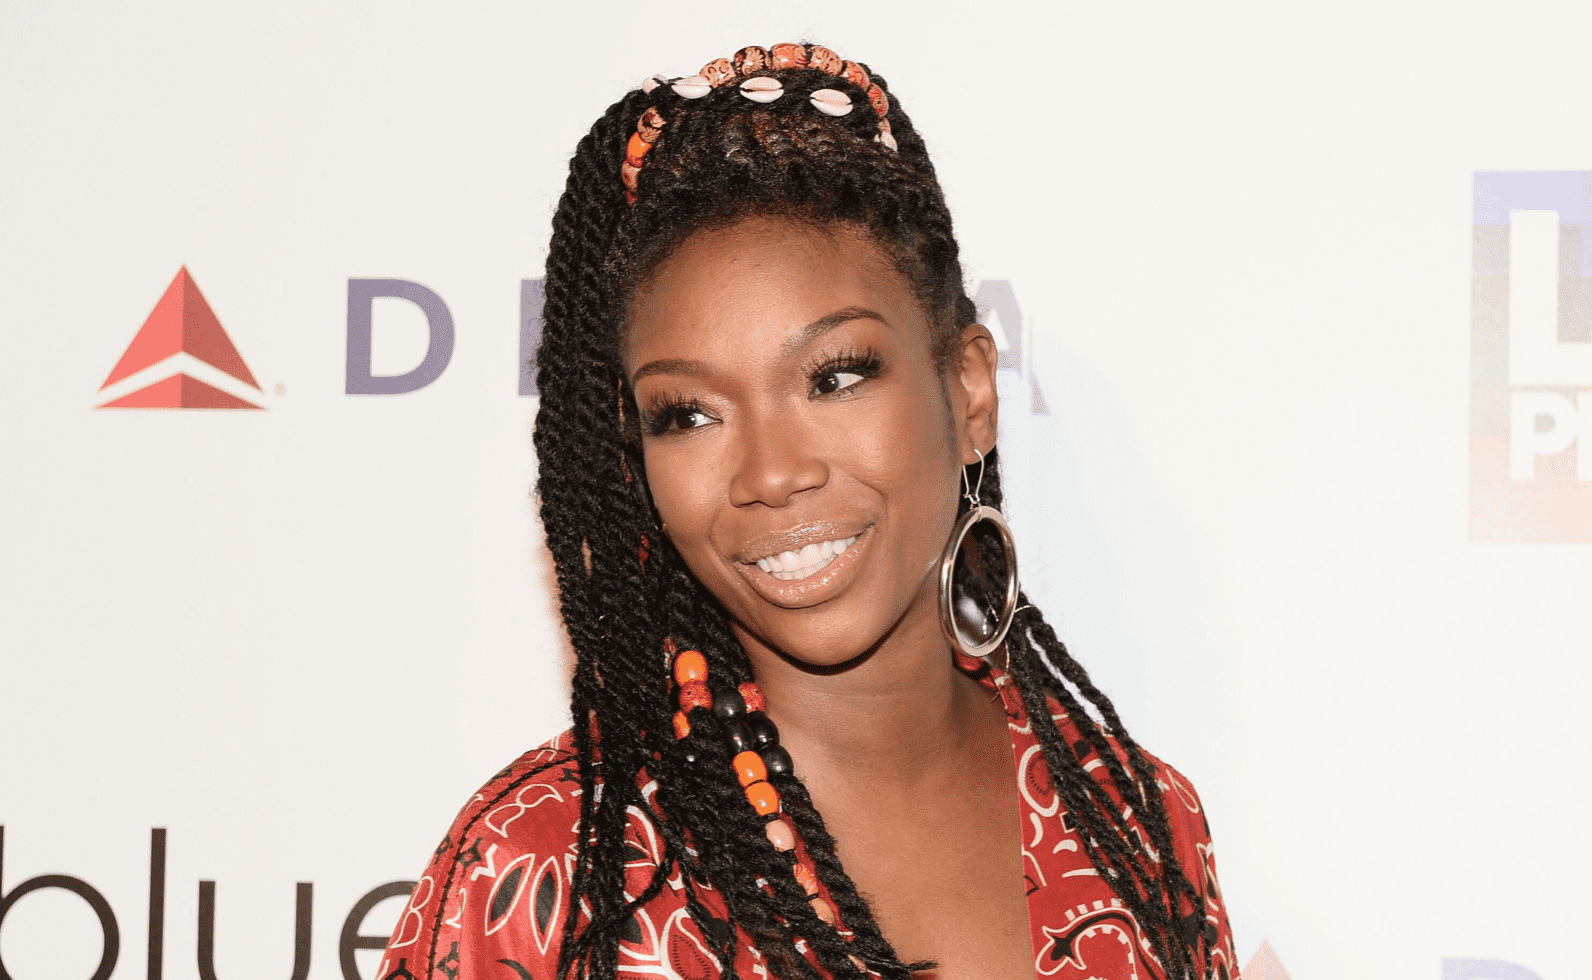 Brandy Norwood attends the LA Pride Music Festival and Parade 2017. | Source: Getty Images